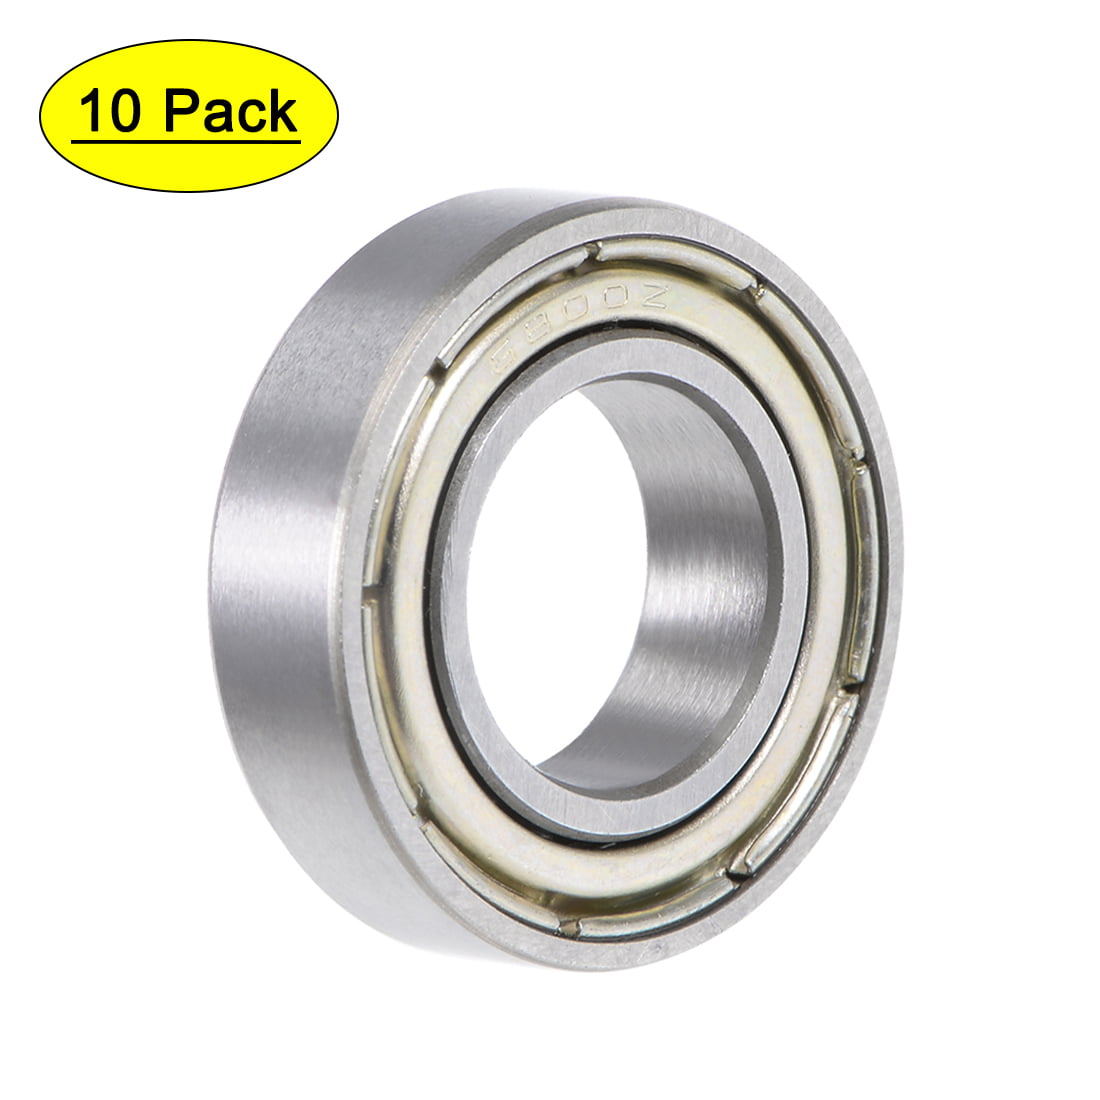 uxcell 35mmx15mmx11mm Double Shielded Deep Groove Ball Bearing Silver Tone 6202Z 2pcs 